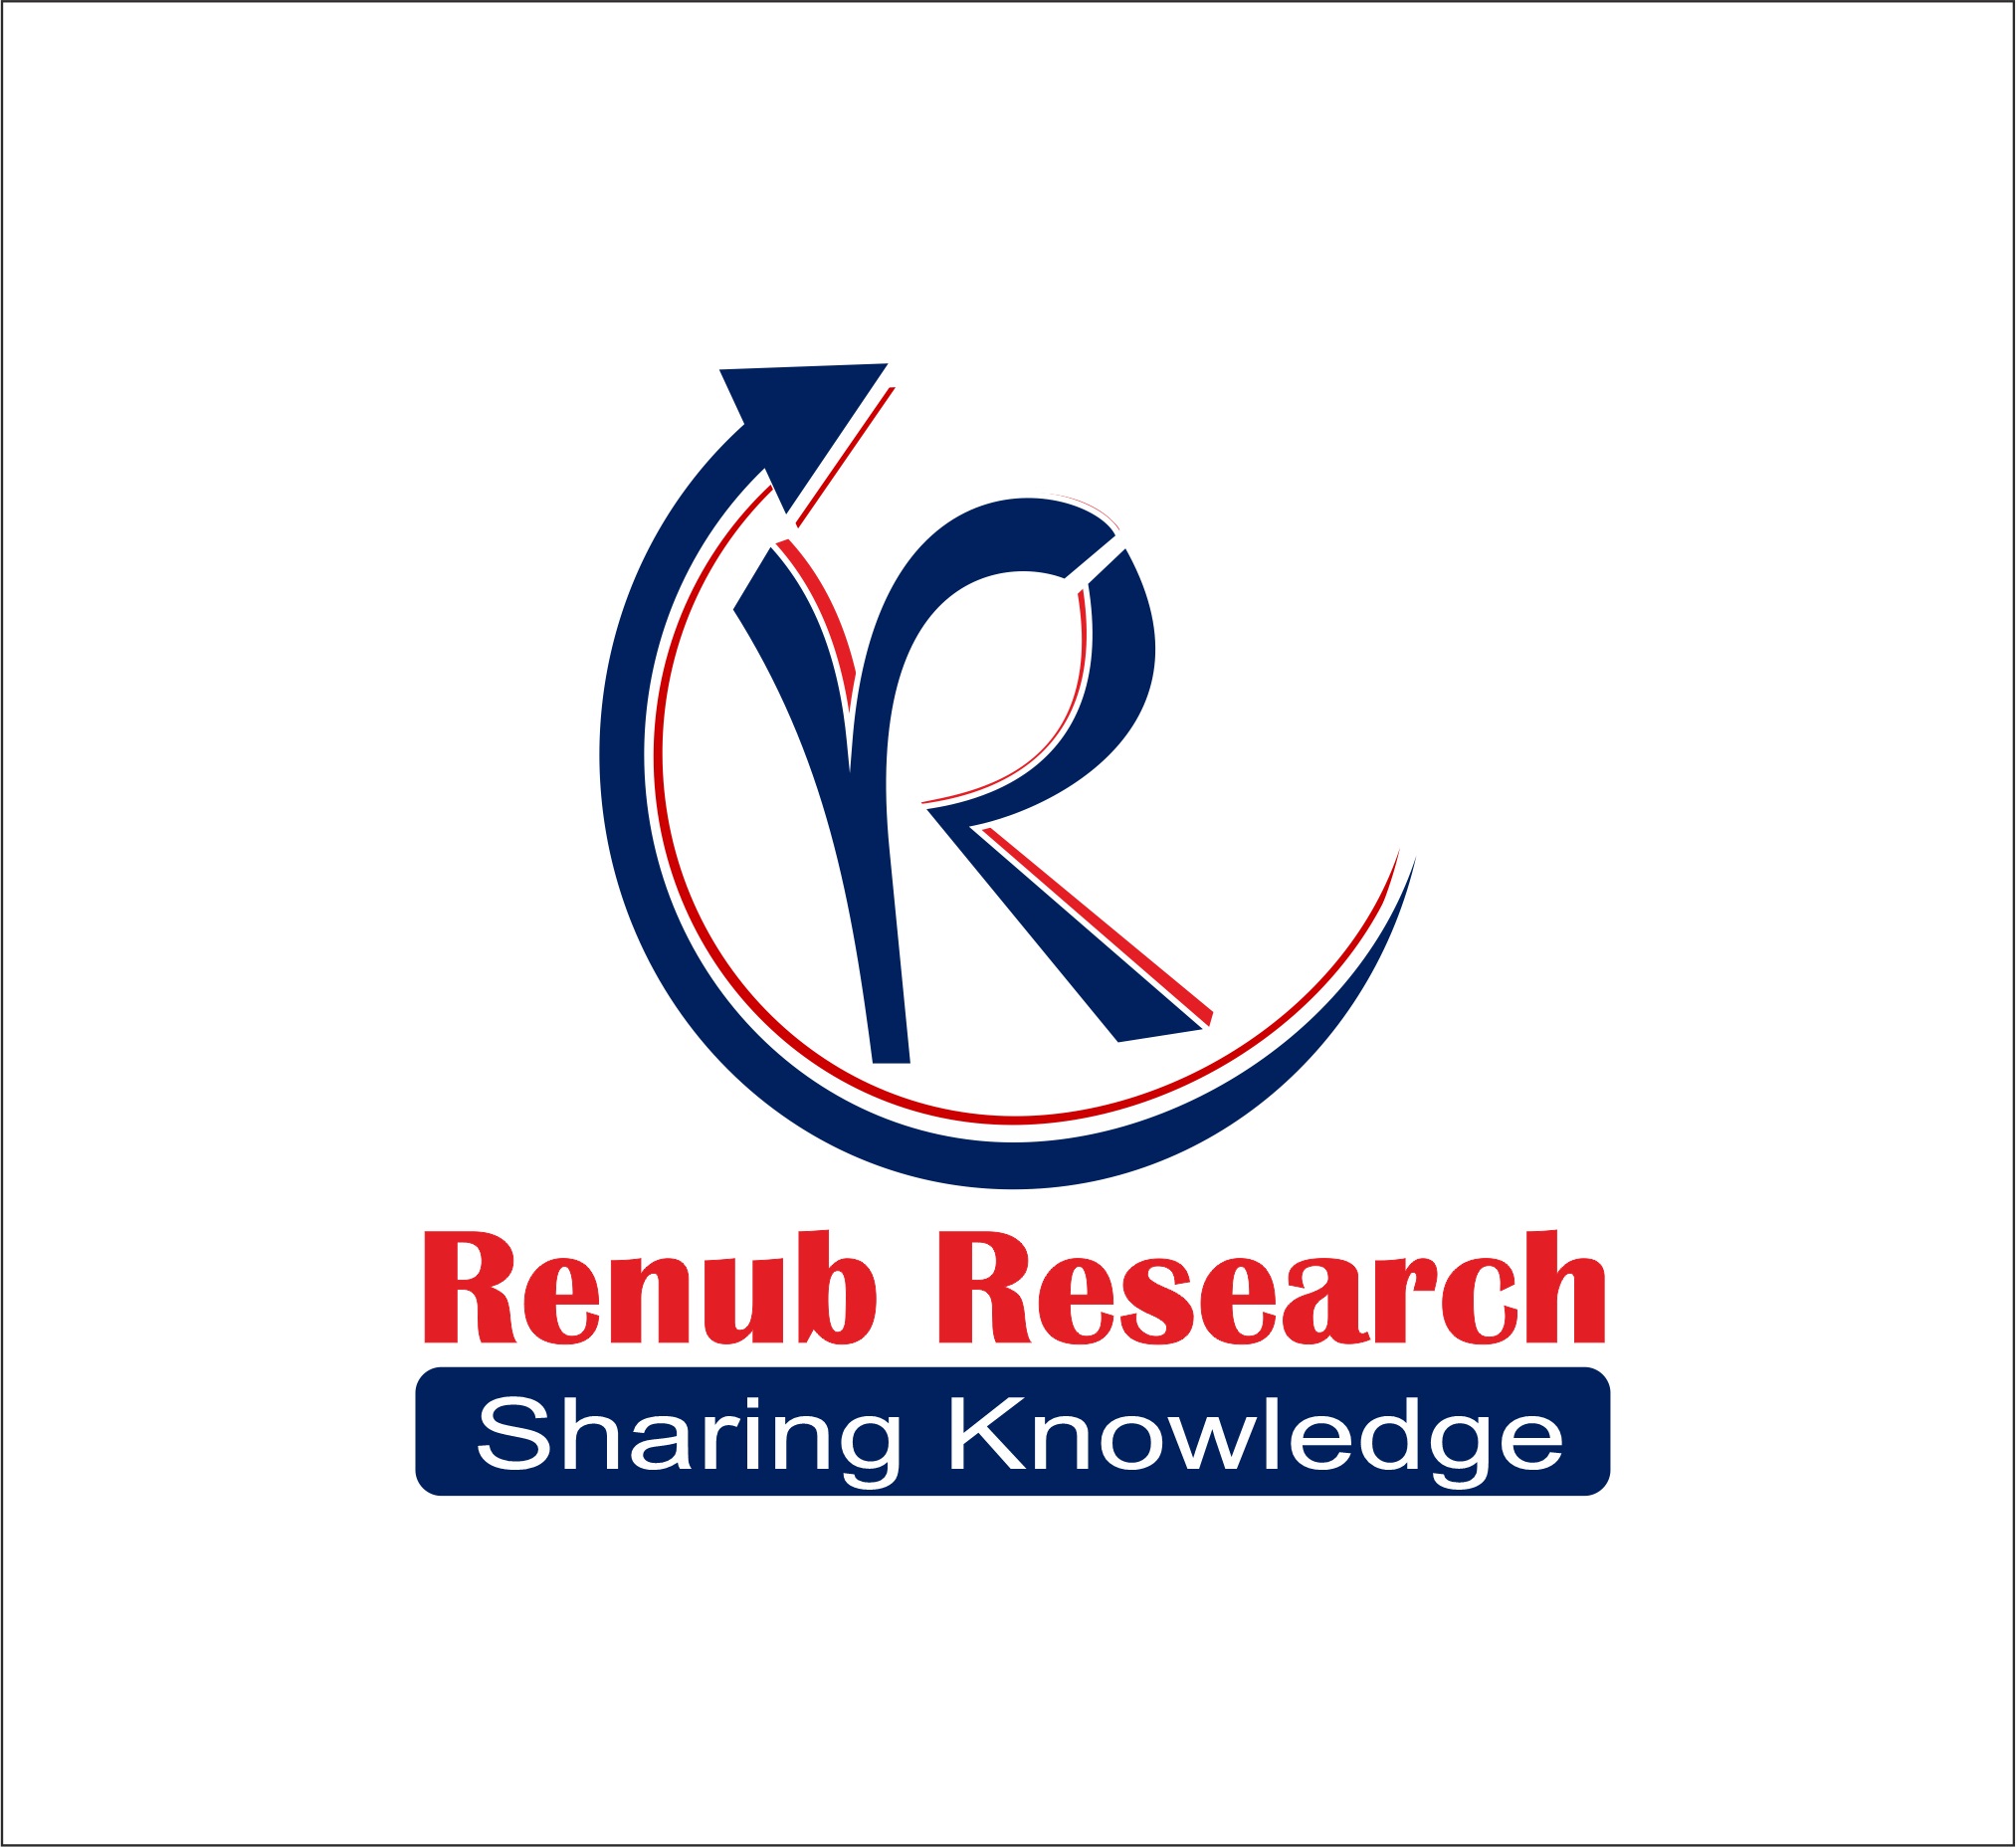 Orthopedic Prosthetic Market Global Forecast by Products & Technology - Renub Research